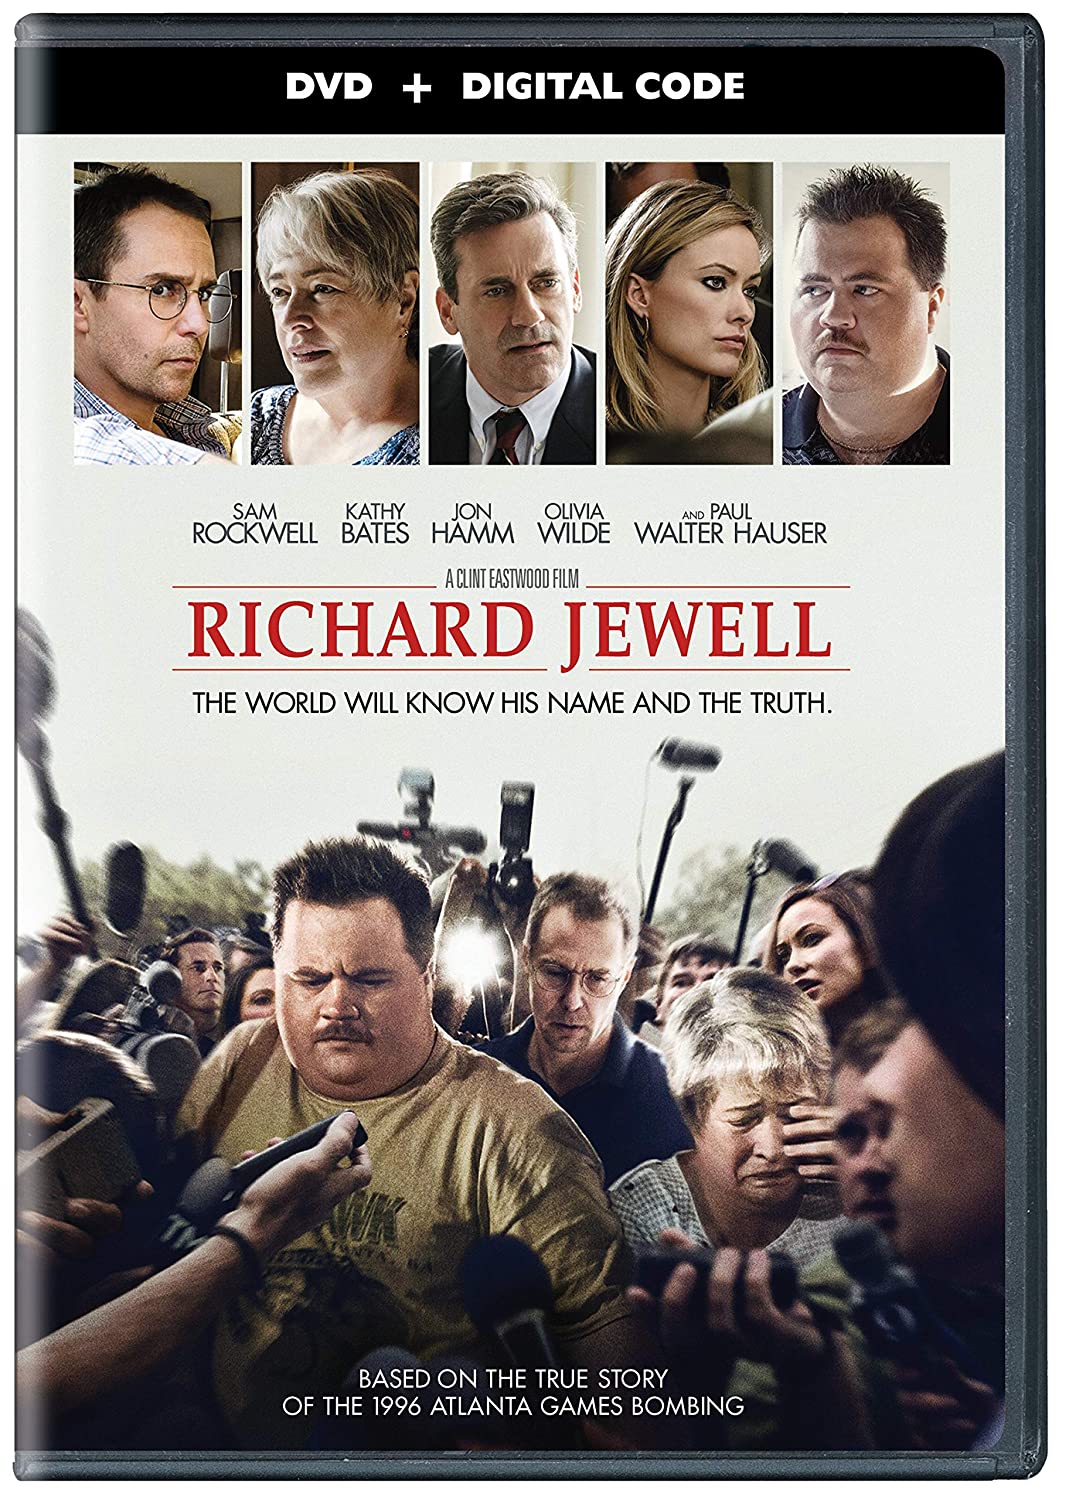 Richard Jewell [DVD] (2019).  Directed by Clint Eastwood.